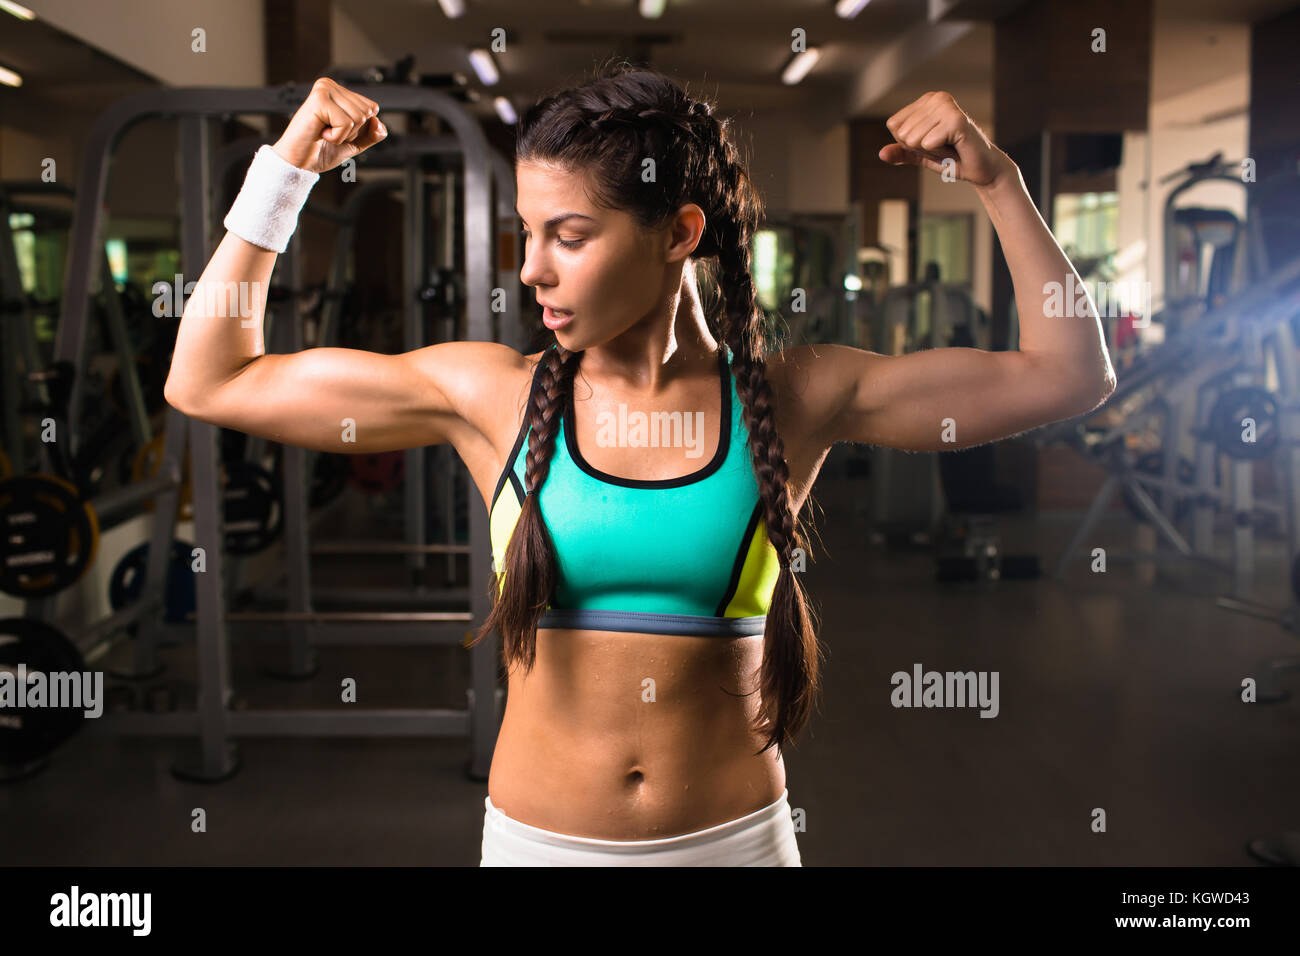 Active muscular girl looking at one of her arms in sports club Stock Photo  - Alamy